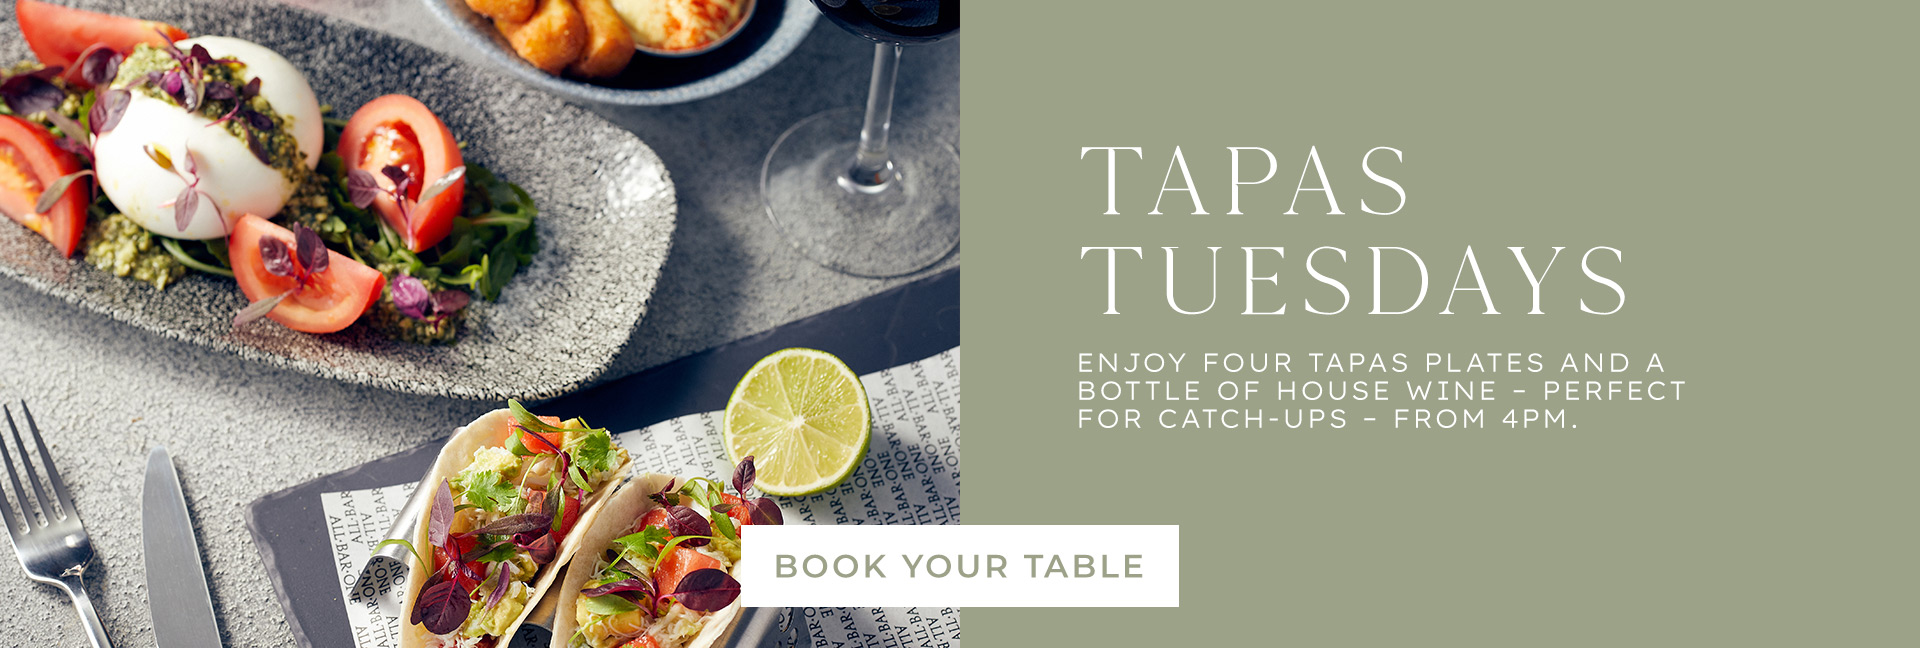 Tapas Tuesday at All Bar One Holborn - Book now